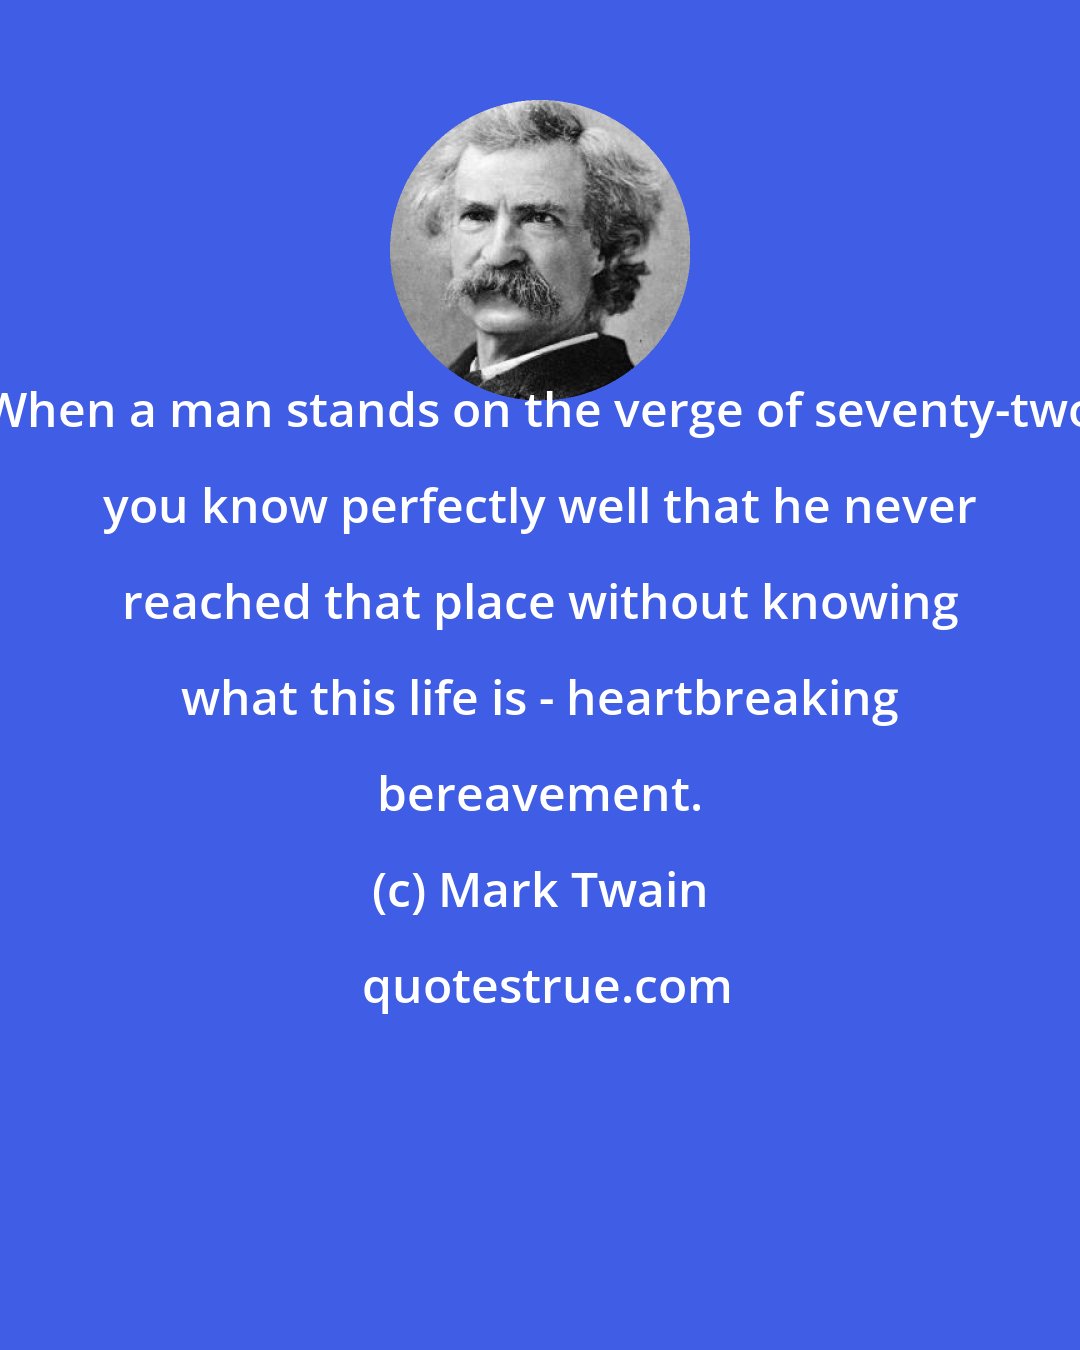 Mark Twain: When a man stands on the verge of seventy-two you know perfectly well that he never reached that place without knowing what this life is - heartbreaking bereavement.